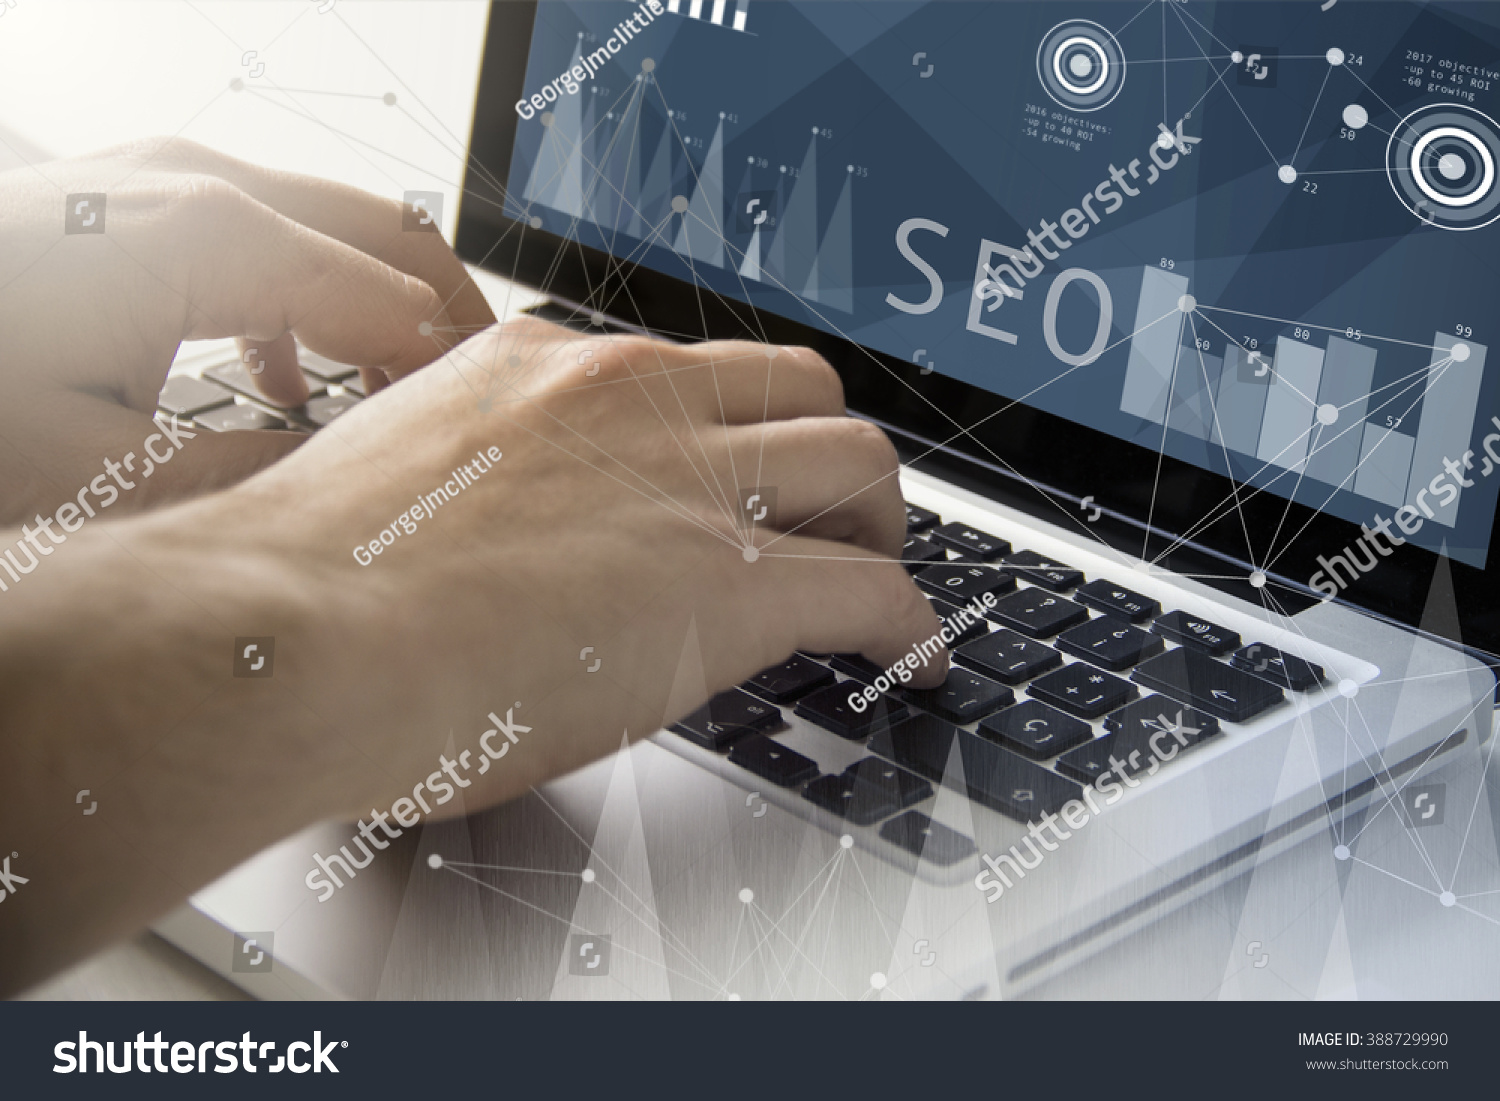 technology and business concept: man using a laptop with seo software on the screen. All screen graphics are made up. #388729990